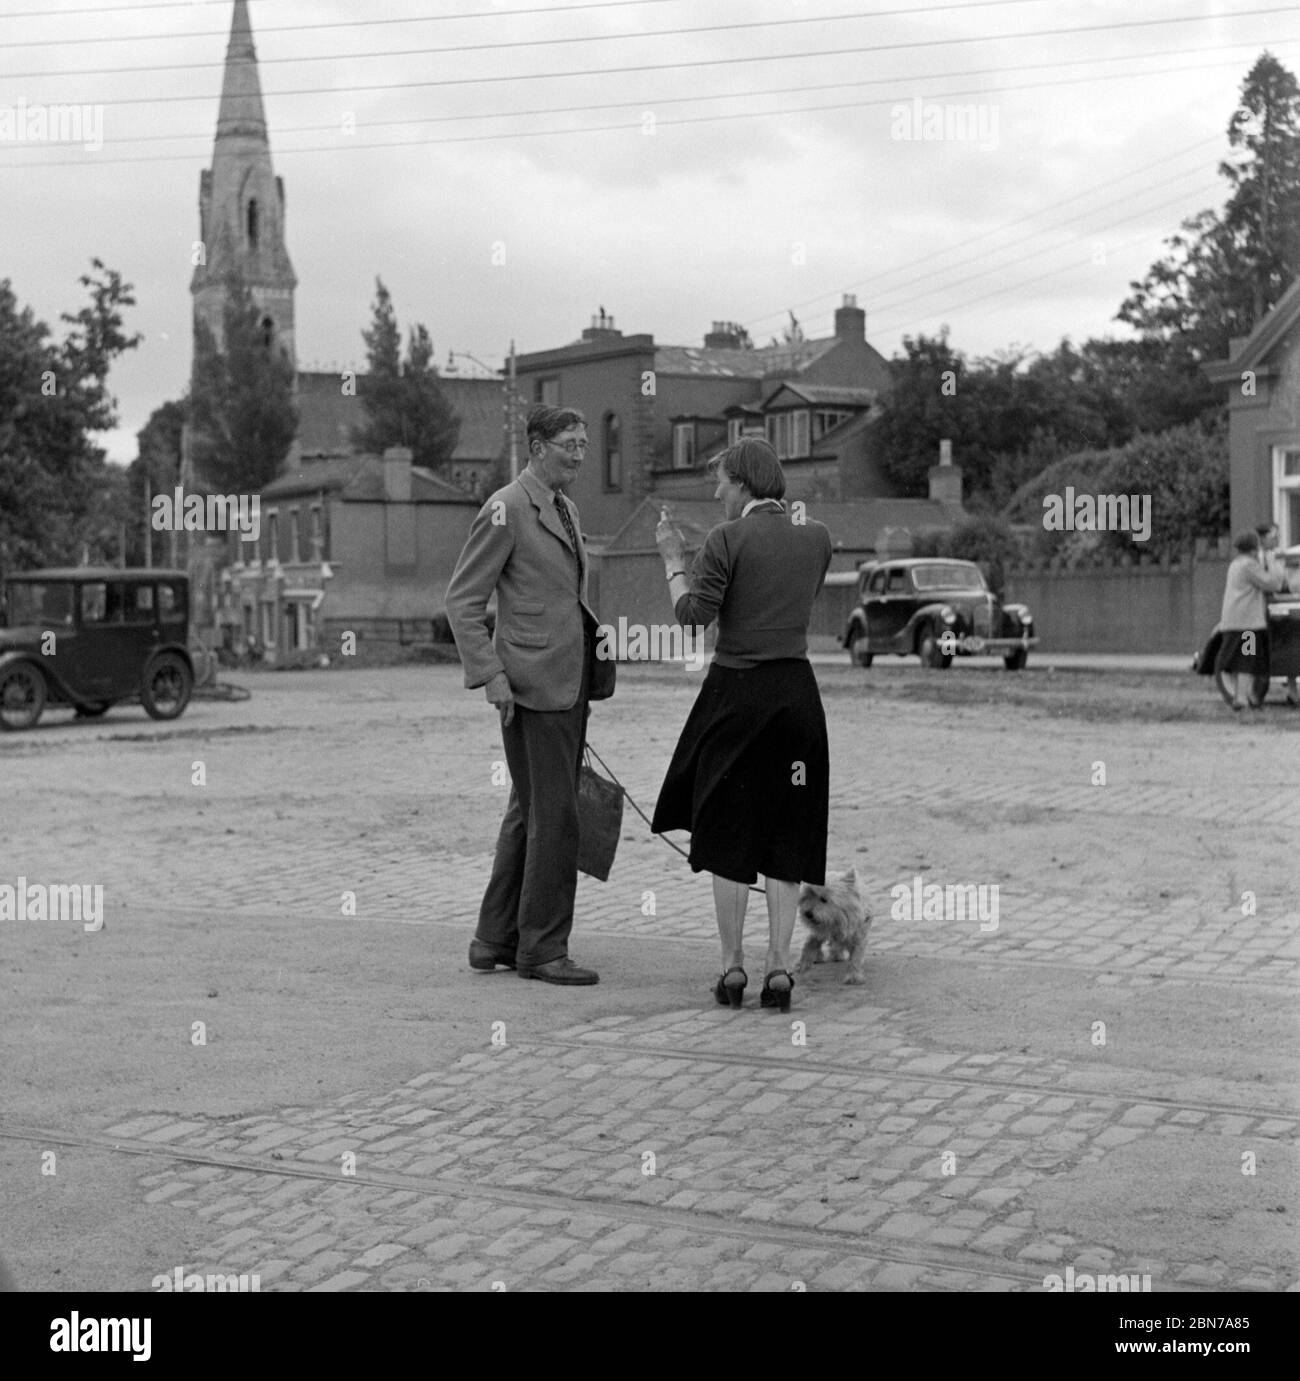 Man talking to woman in cobbled square, church visible in background, Co. Dublin by National Library of Ireland on The Commons Stock Photo